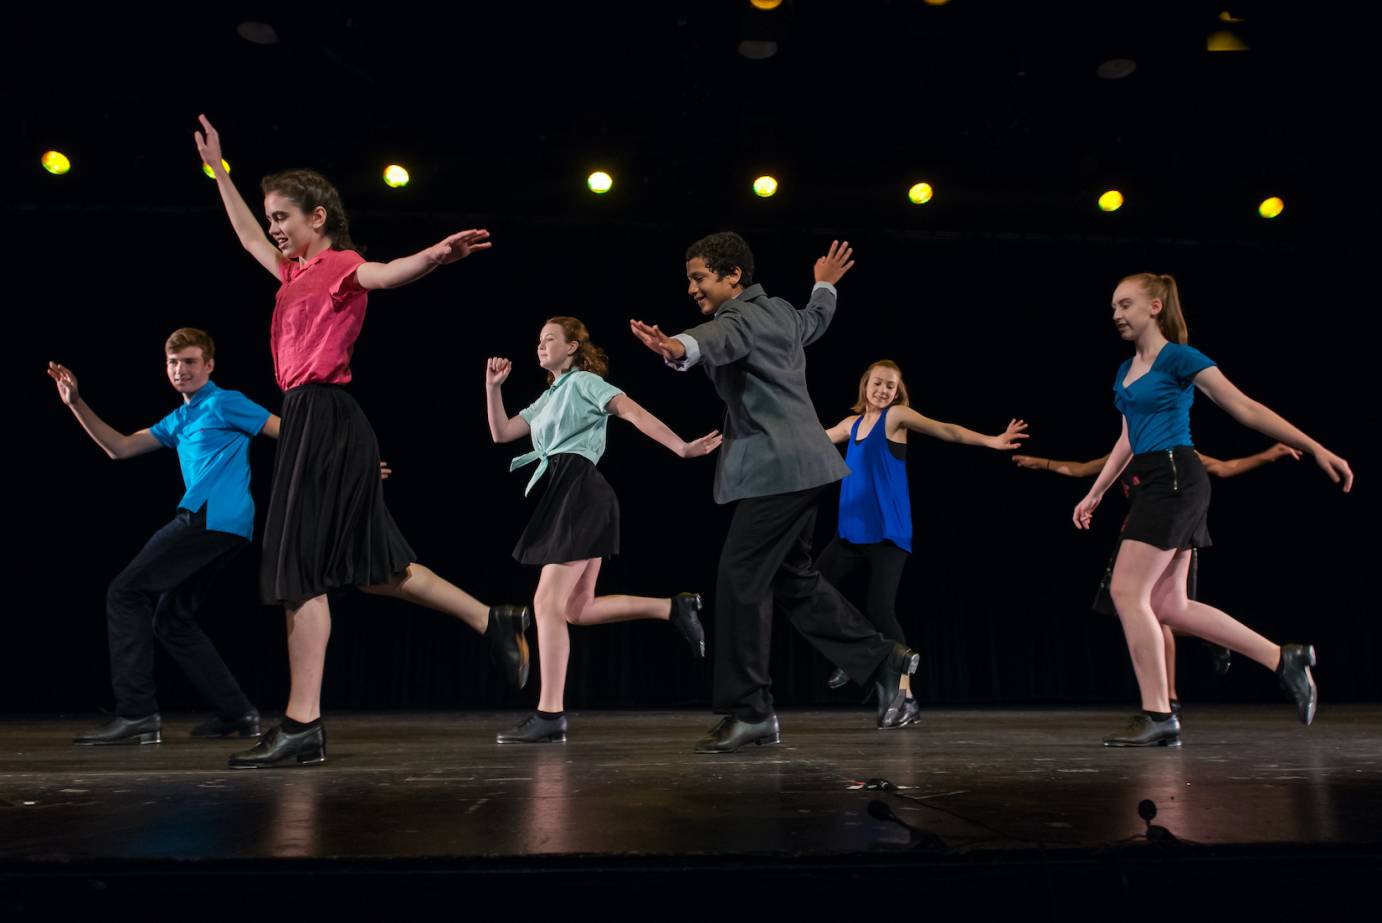 a group of young students joyfully tapping on stage  wearing bright solid color tops and black bottoms